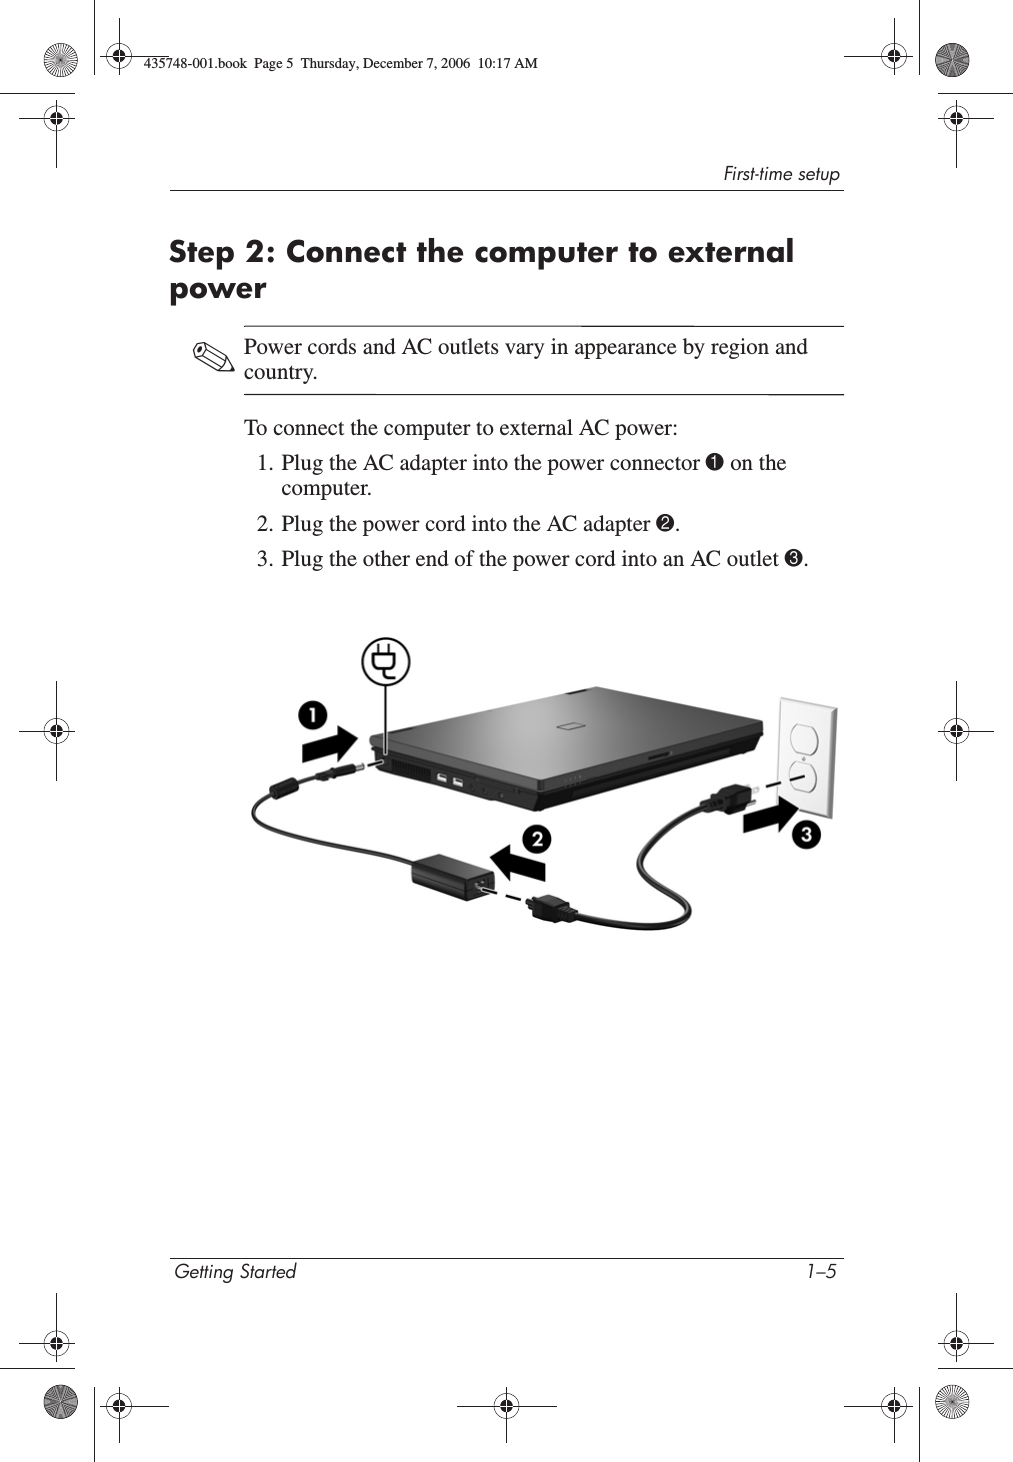 First-time setupGetting Started 1–5Step 2: Connect the computer to external power✎Power cords and AC outlets vary in appearance by region and country.To connect the computer to external AC power:1. Plug the AC adapter into the power connector 1 on the computer.2. Plug the power cord into the AC adapter 2.3. Plug the other end of the power cord into an AC outlet 3.435748-001.book  Page 5  Thursday, December 7, 2006  10:17 AM